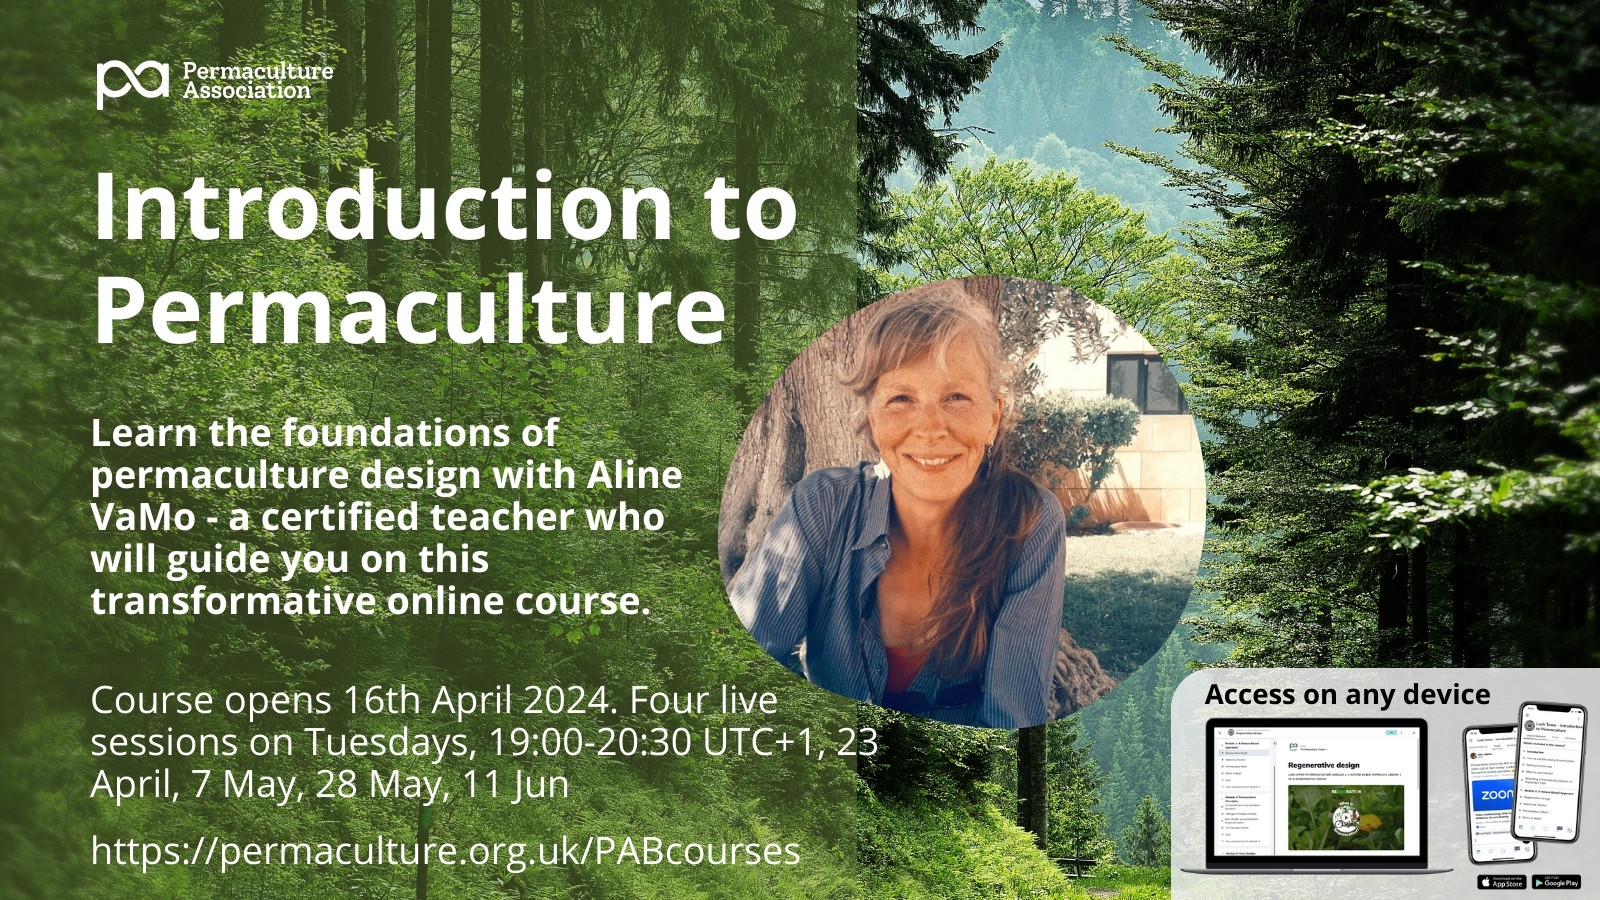 Introduction to Permaculture with Aline VaMo